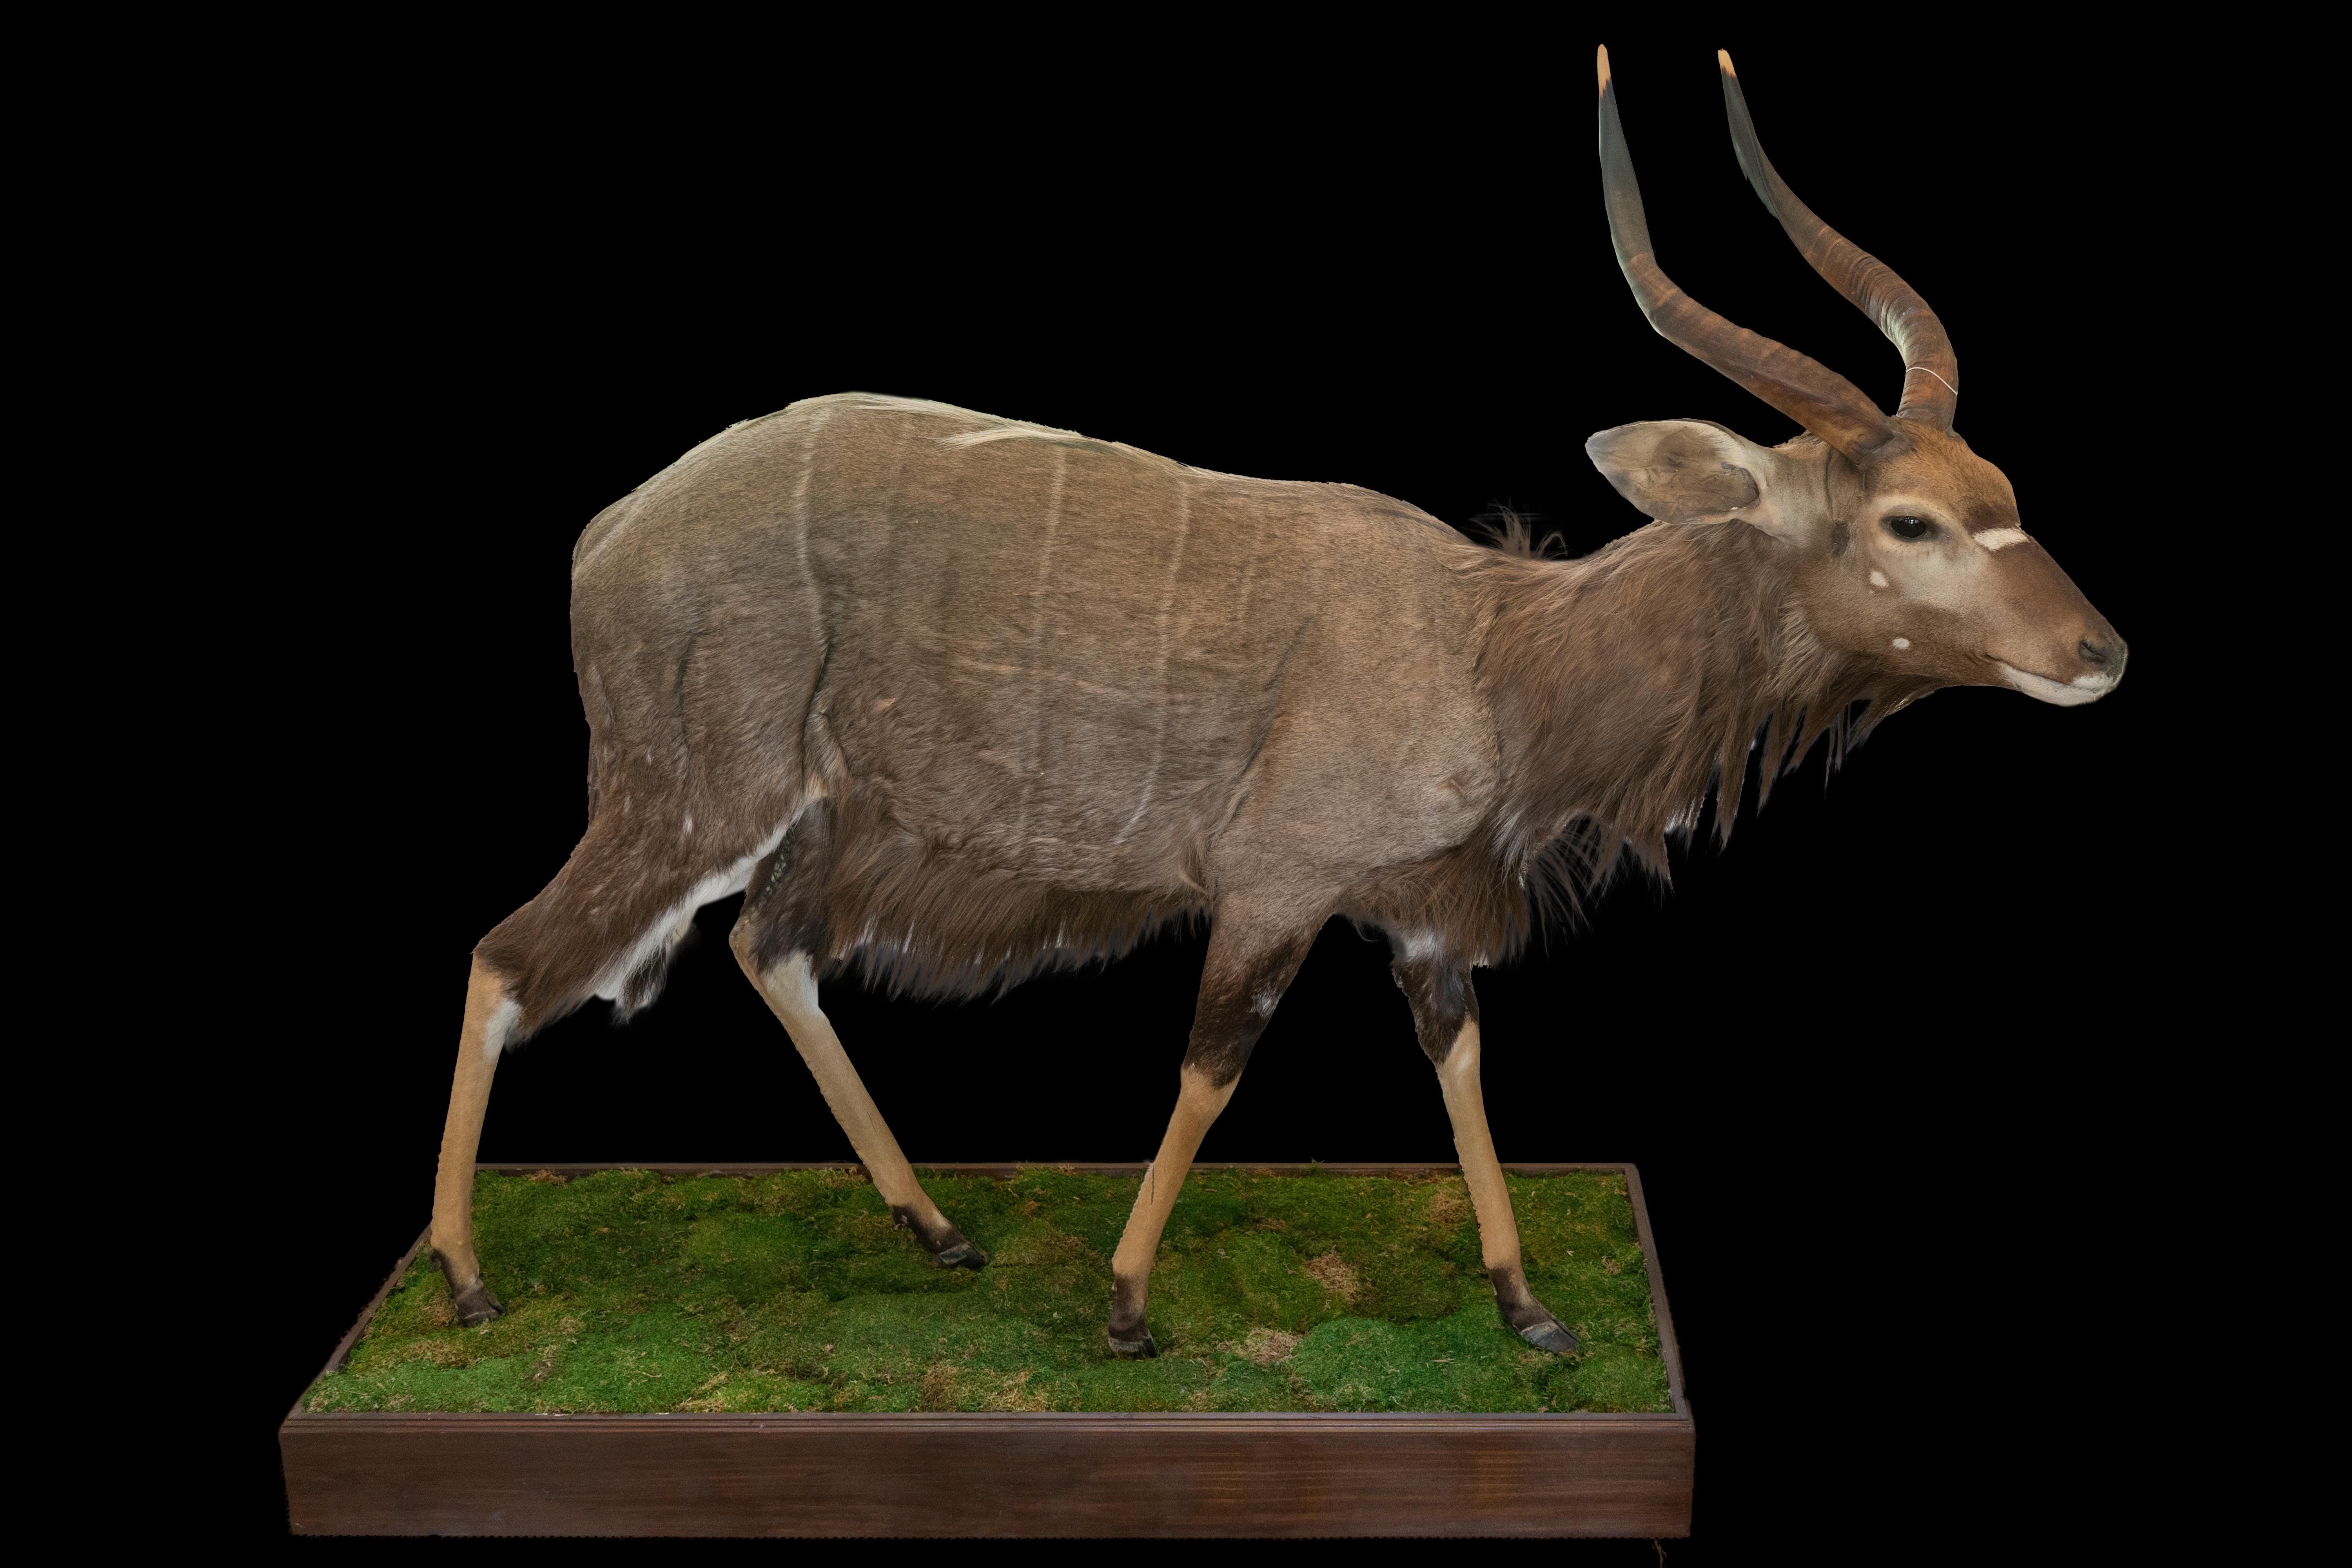 This full-sized Nyala taxidermy is an impressive and striking piece that captures the beauty and majesty of this magnificent African antelope. Mounted on a naturalistic green grass base, this mount measures approximately 70